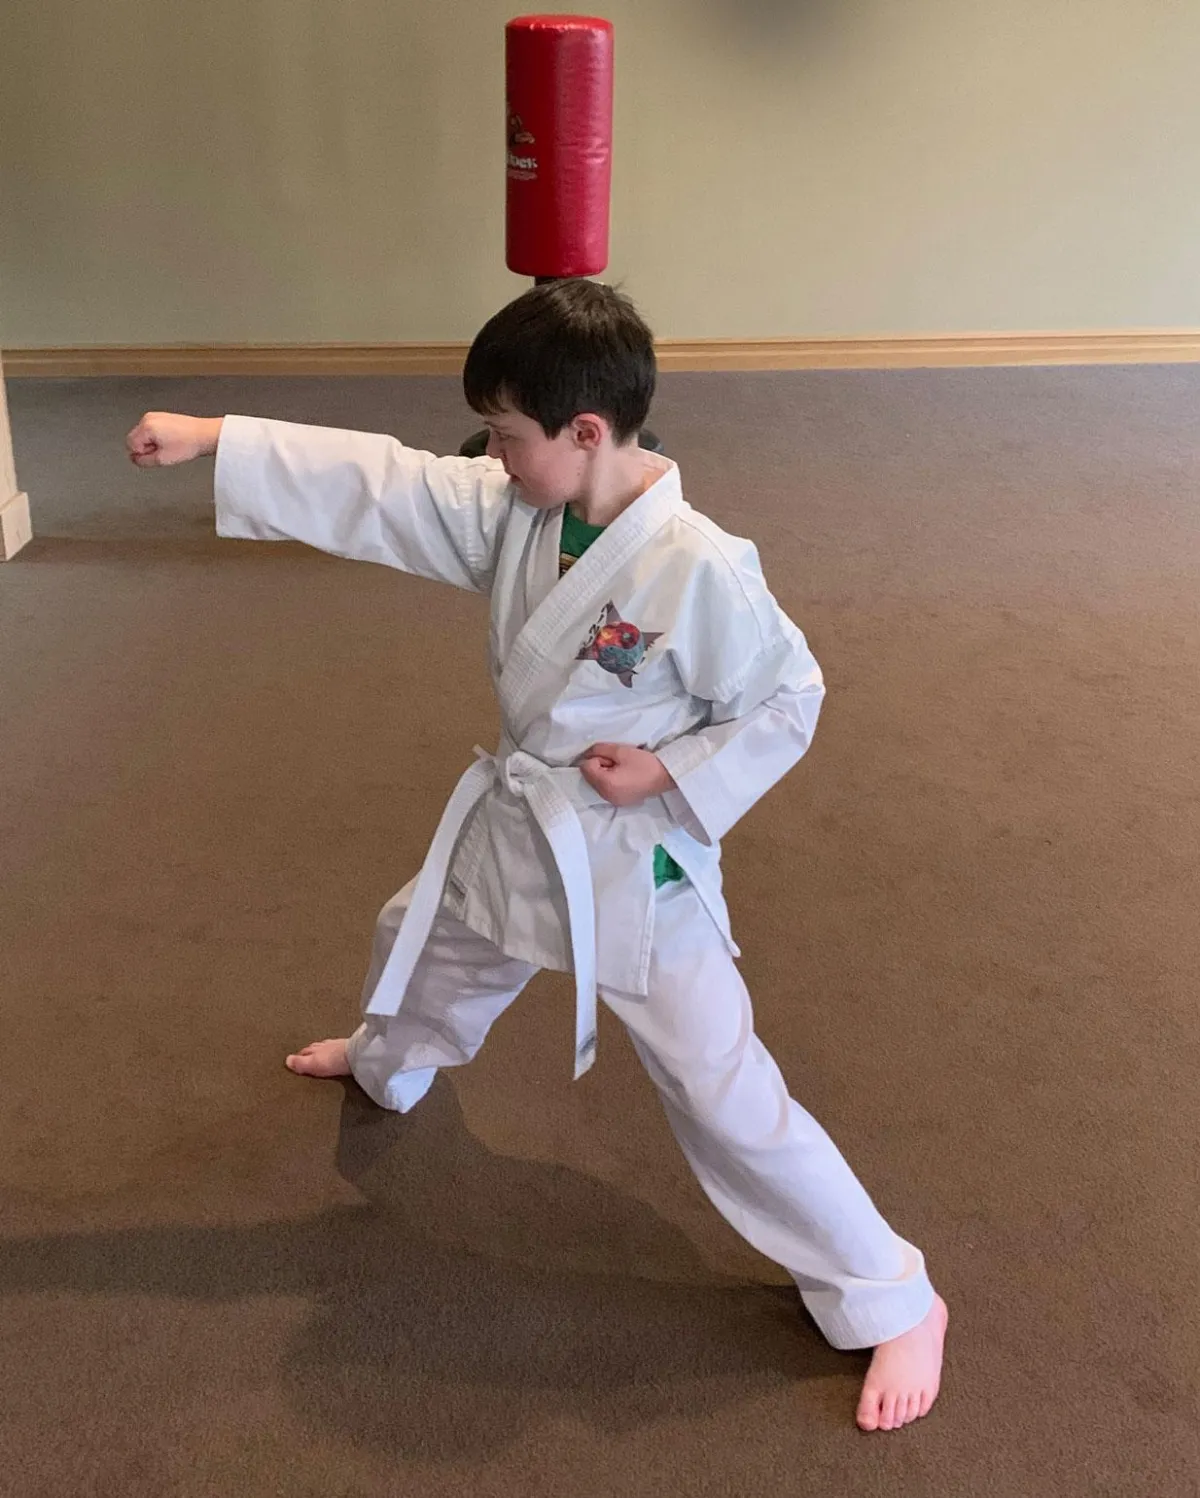 young boy in Ninja Fit karate uniform holding karate punch in good stance while keeping eyes focused on punching knuckles